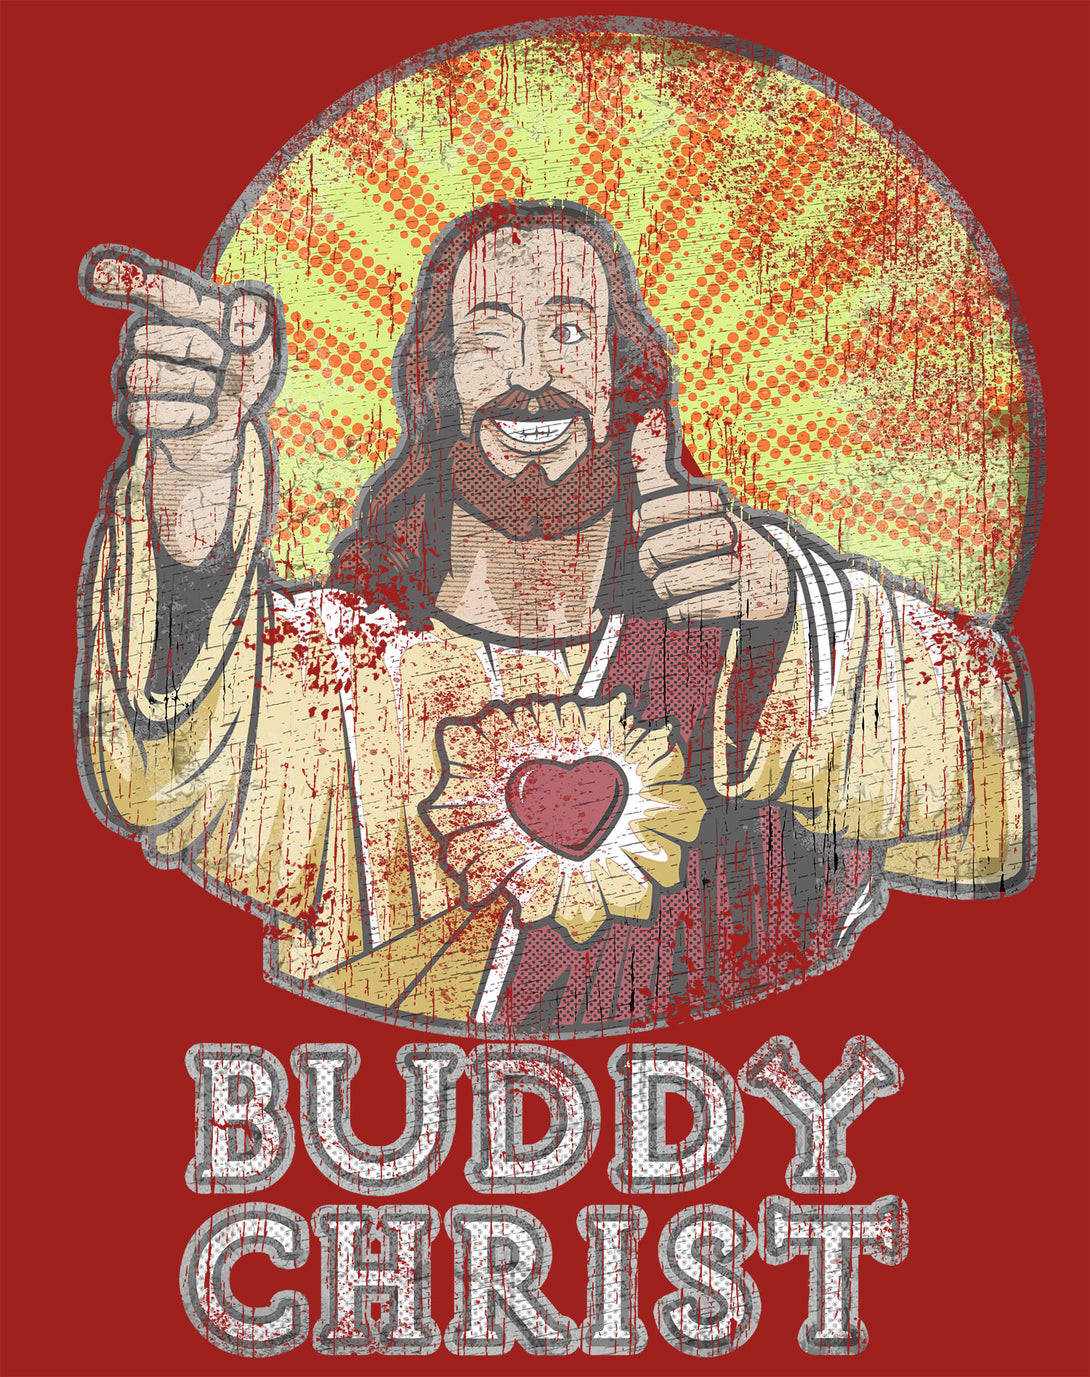 Kevin Smith View Askewniverse Buddy Christ Got Summer Vintage Variant Official Women's T-Shirt Red - Urban Species Design Close Up